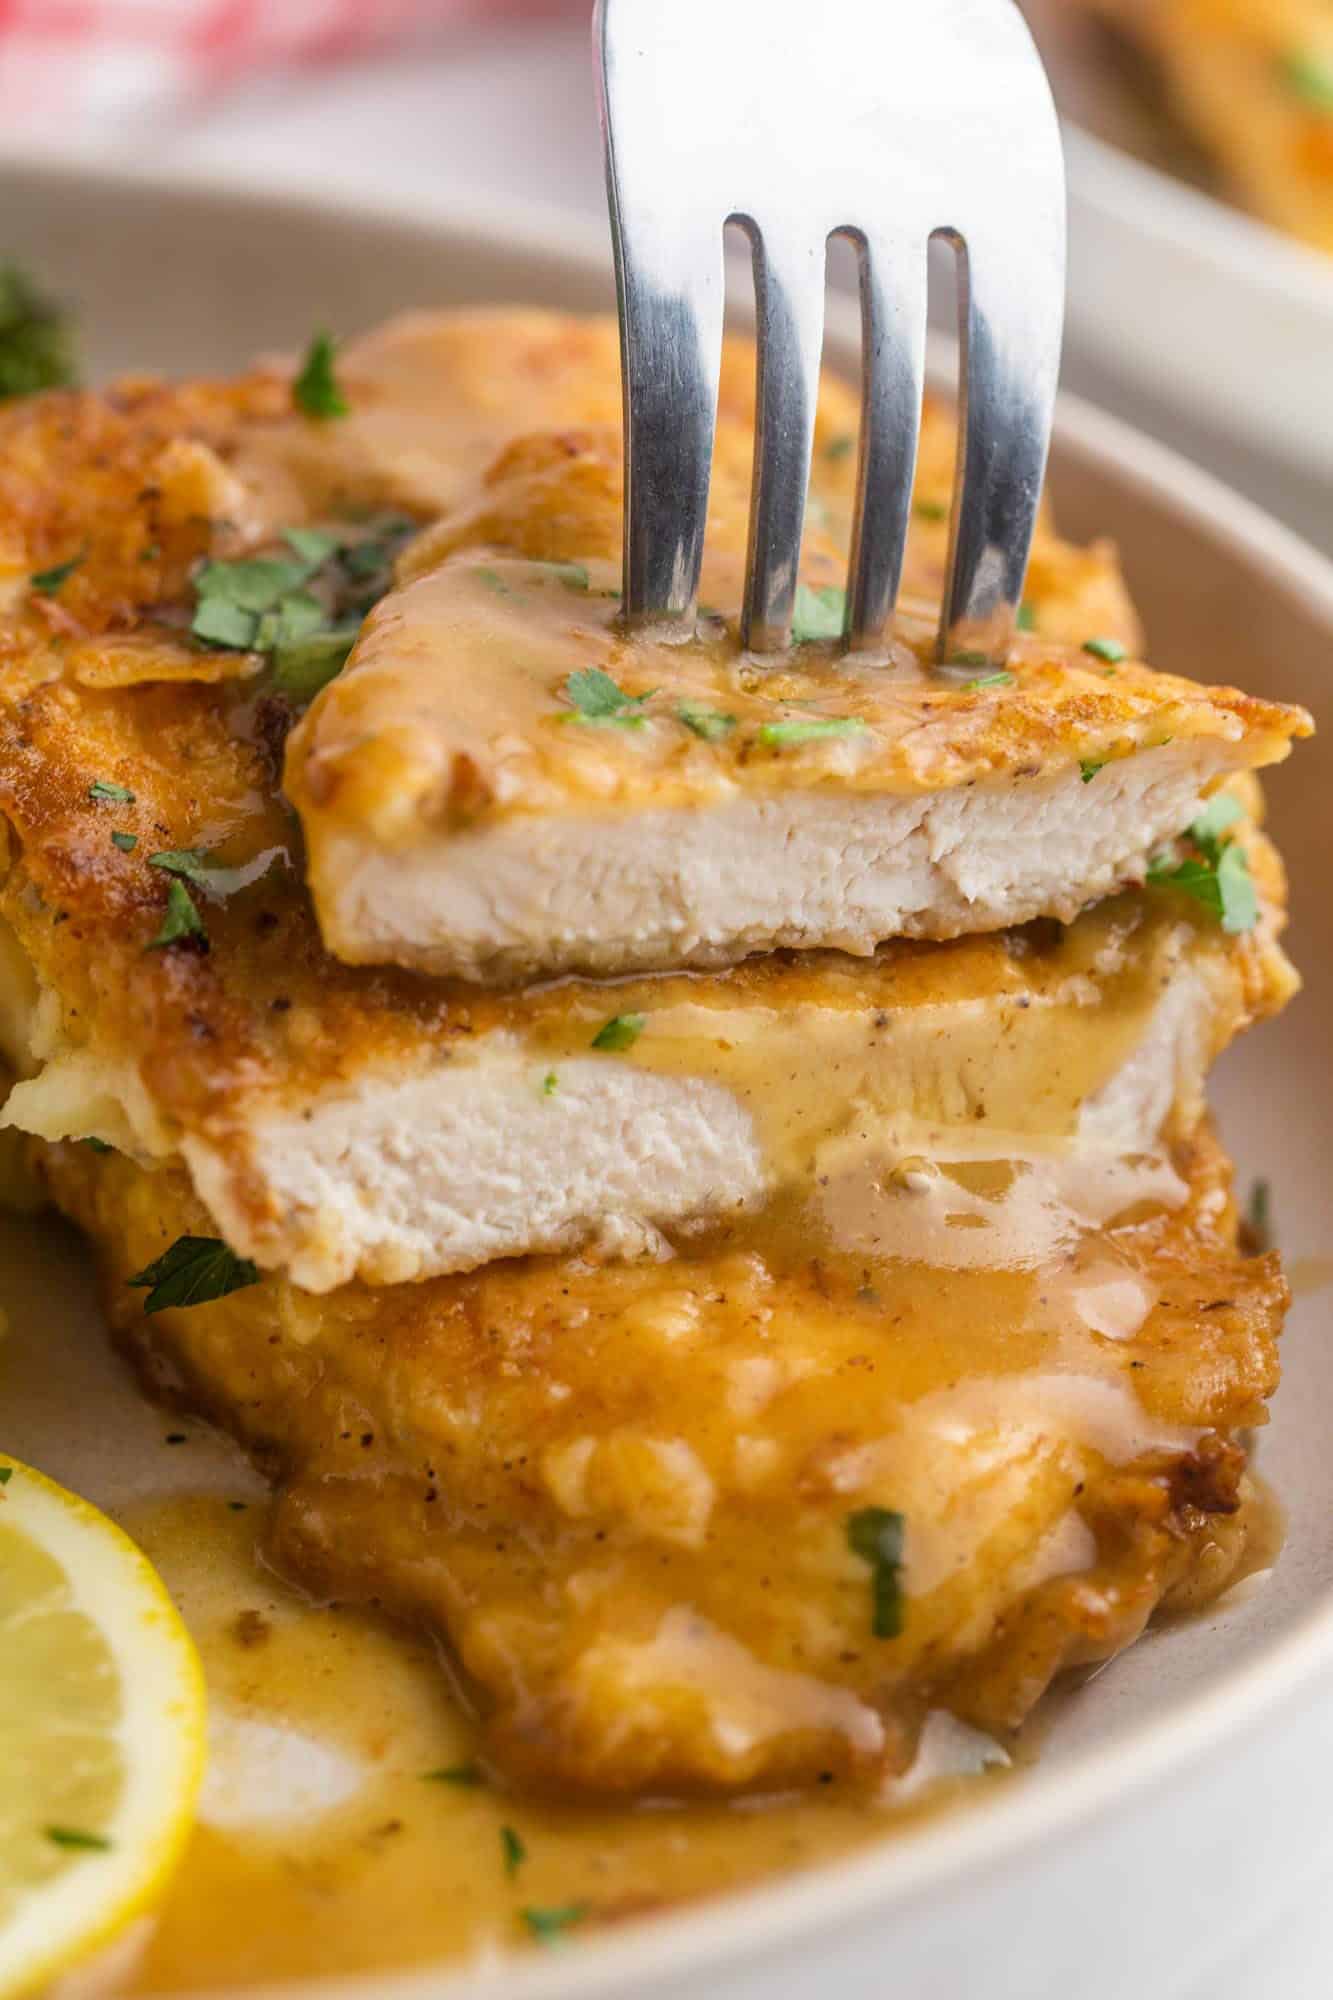 chicken francese on a plate, a piece has been cut in half to show interior texture of the chicken.